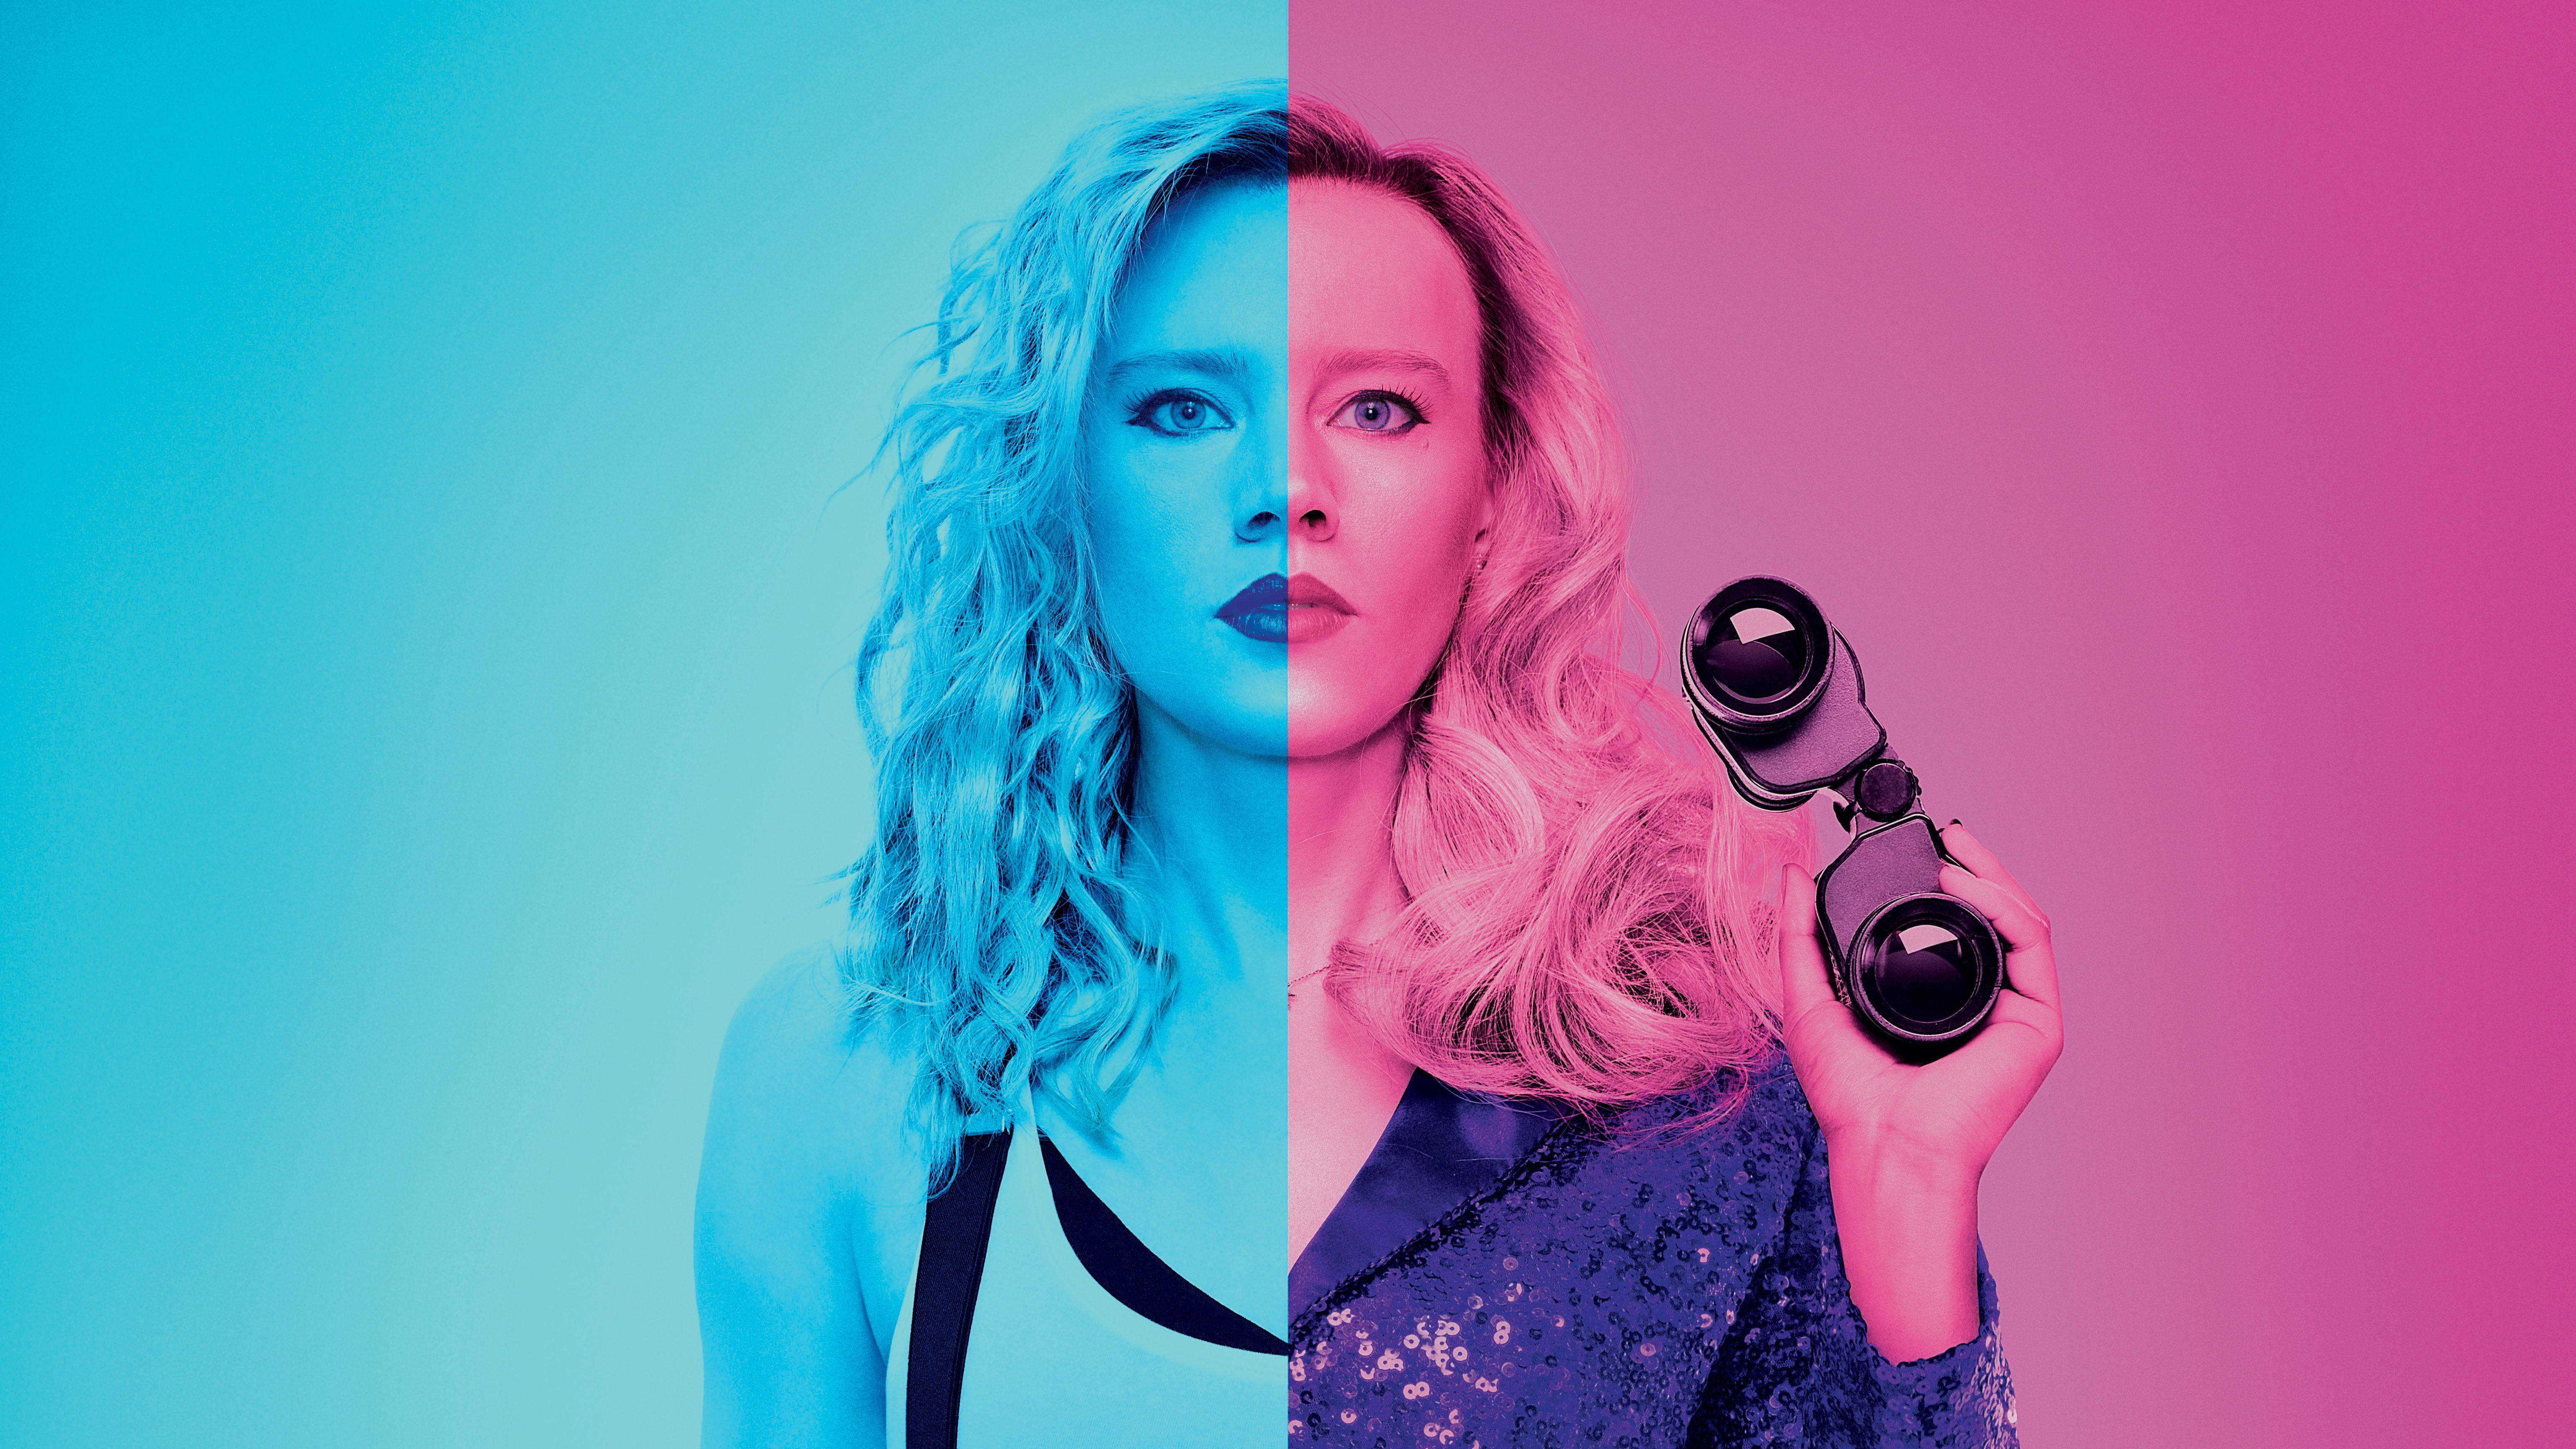 Kate McKinnon In The Spy Who Dumped Me 2018 Movie, HD Movies, 4k